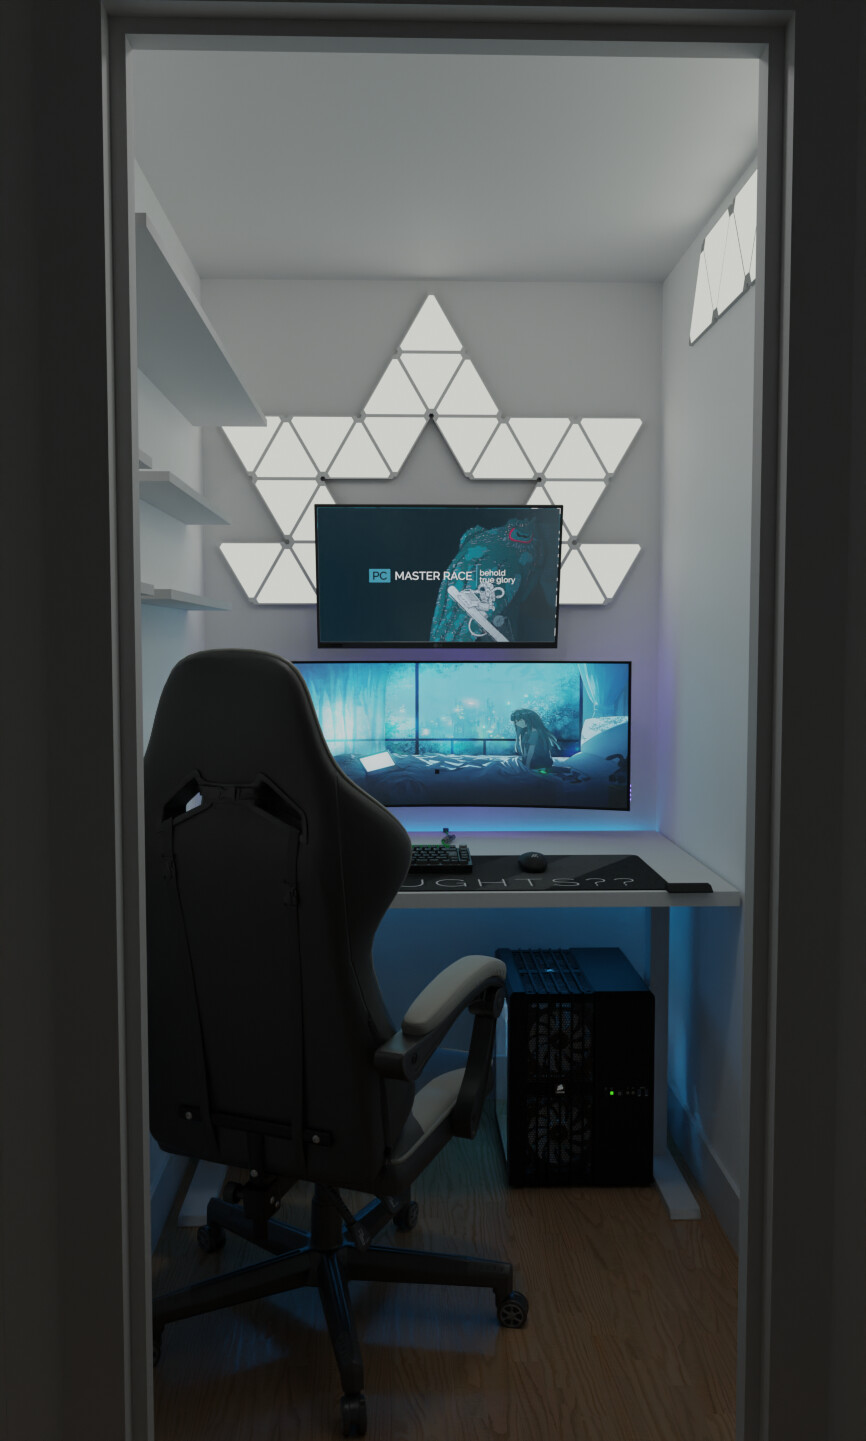 Gaming/Office Setup in a Tiny Space - Finished Projects - Blender Artists  Community